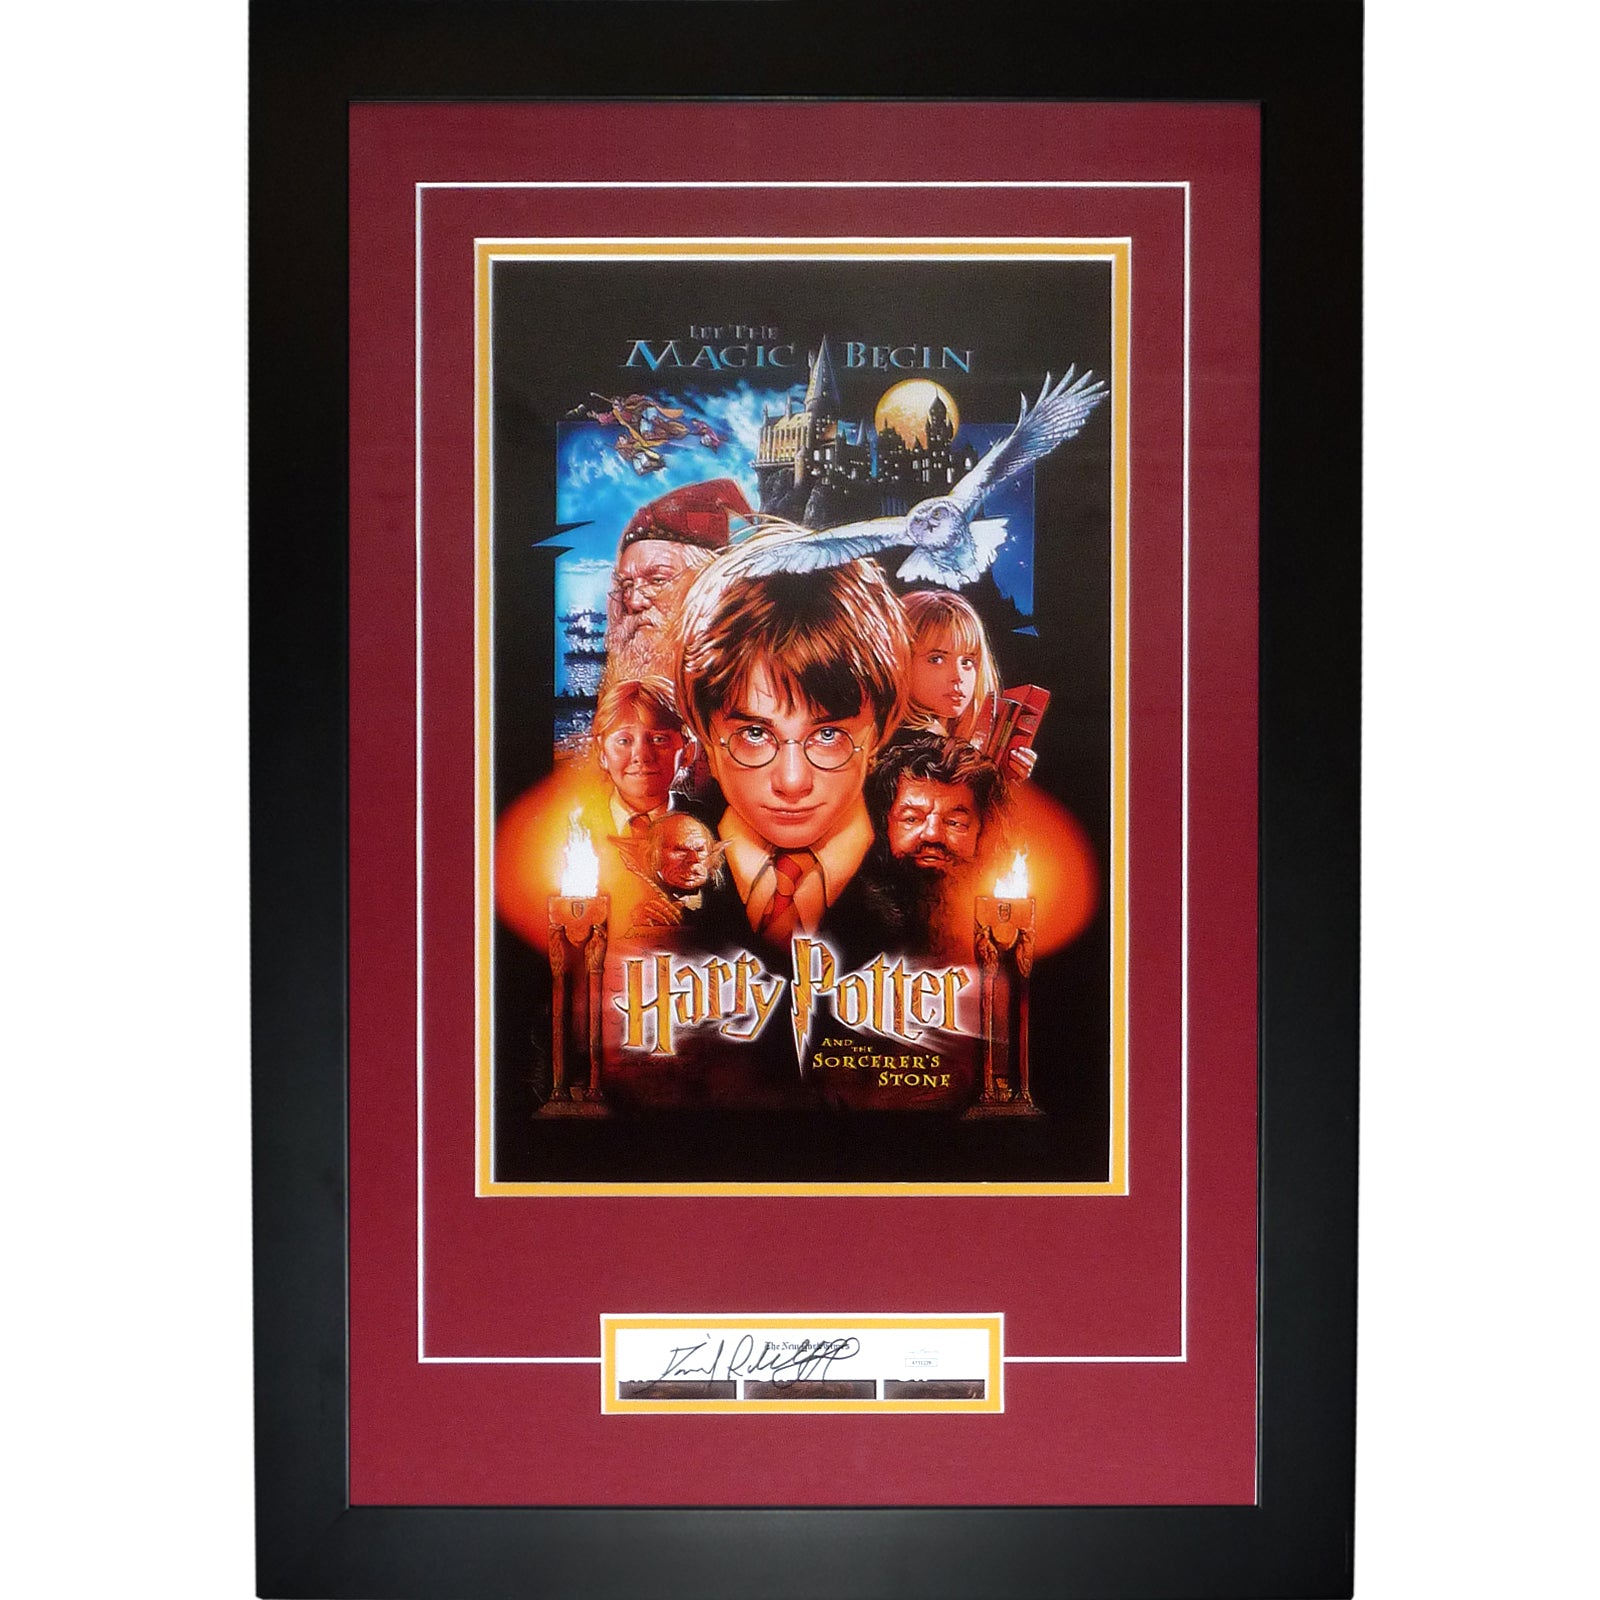 Harry Potter 11x17 Movie Poster Deluxe Framed with Daniel Radcliffe Autograph - JSA